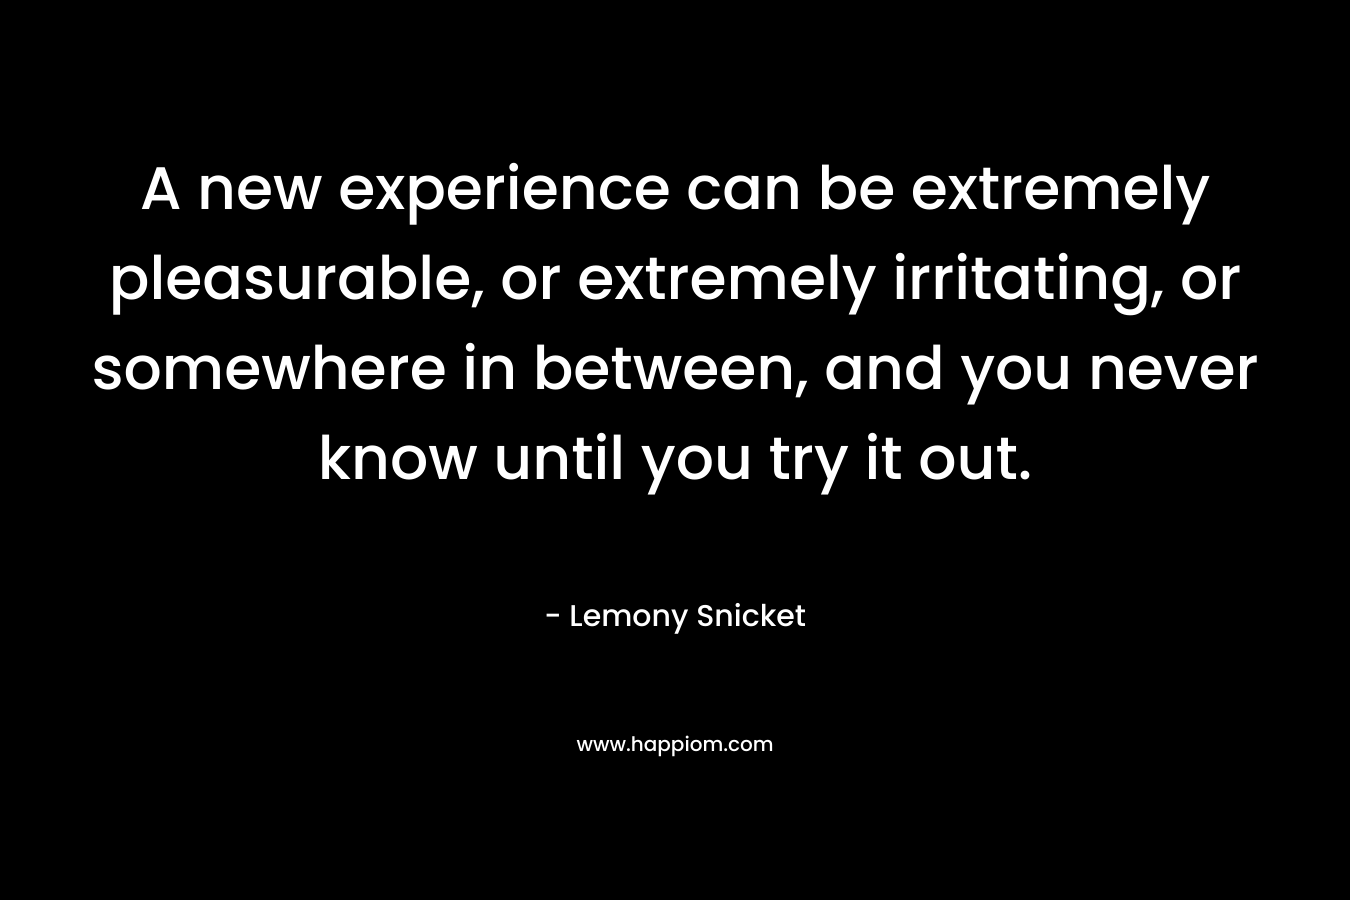 A new experience can be extremely pleasurable, or extremely irritating, or somewhere in between, and you never know until you try it out. – Lemony Snicket